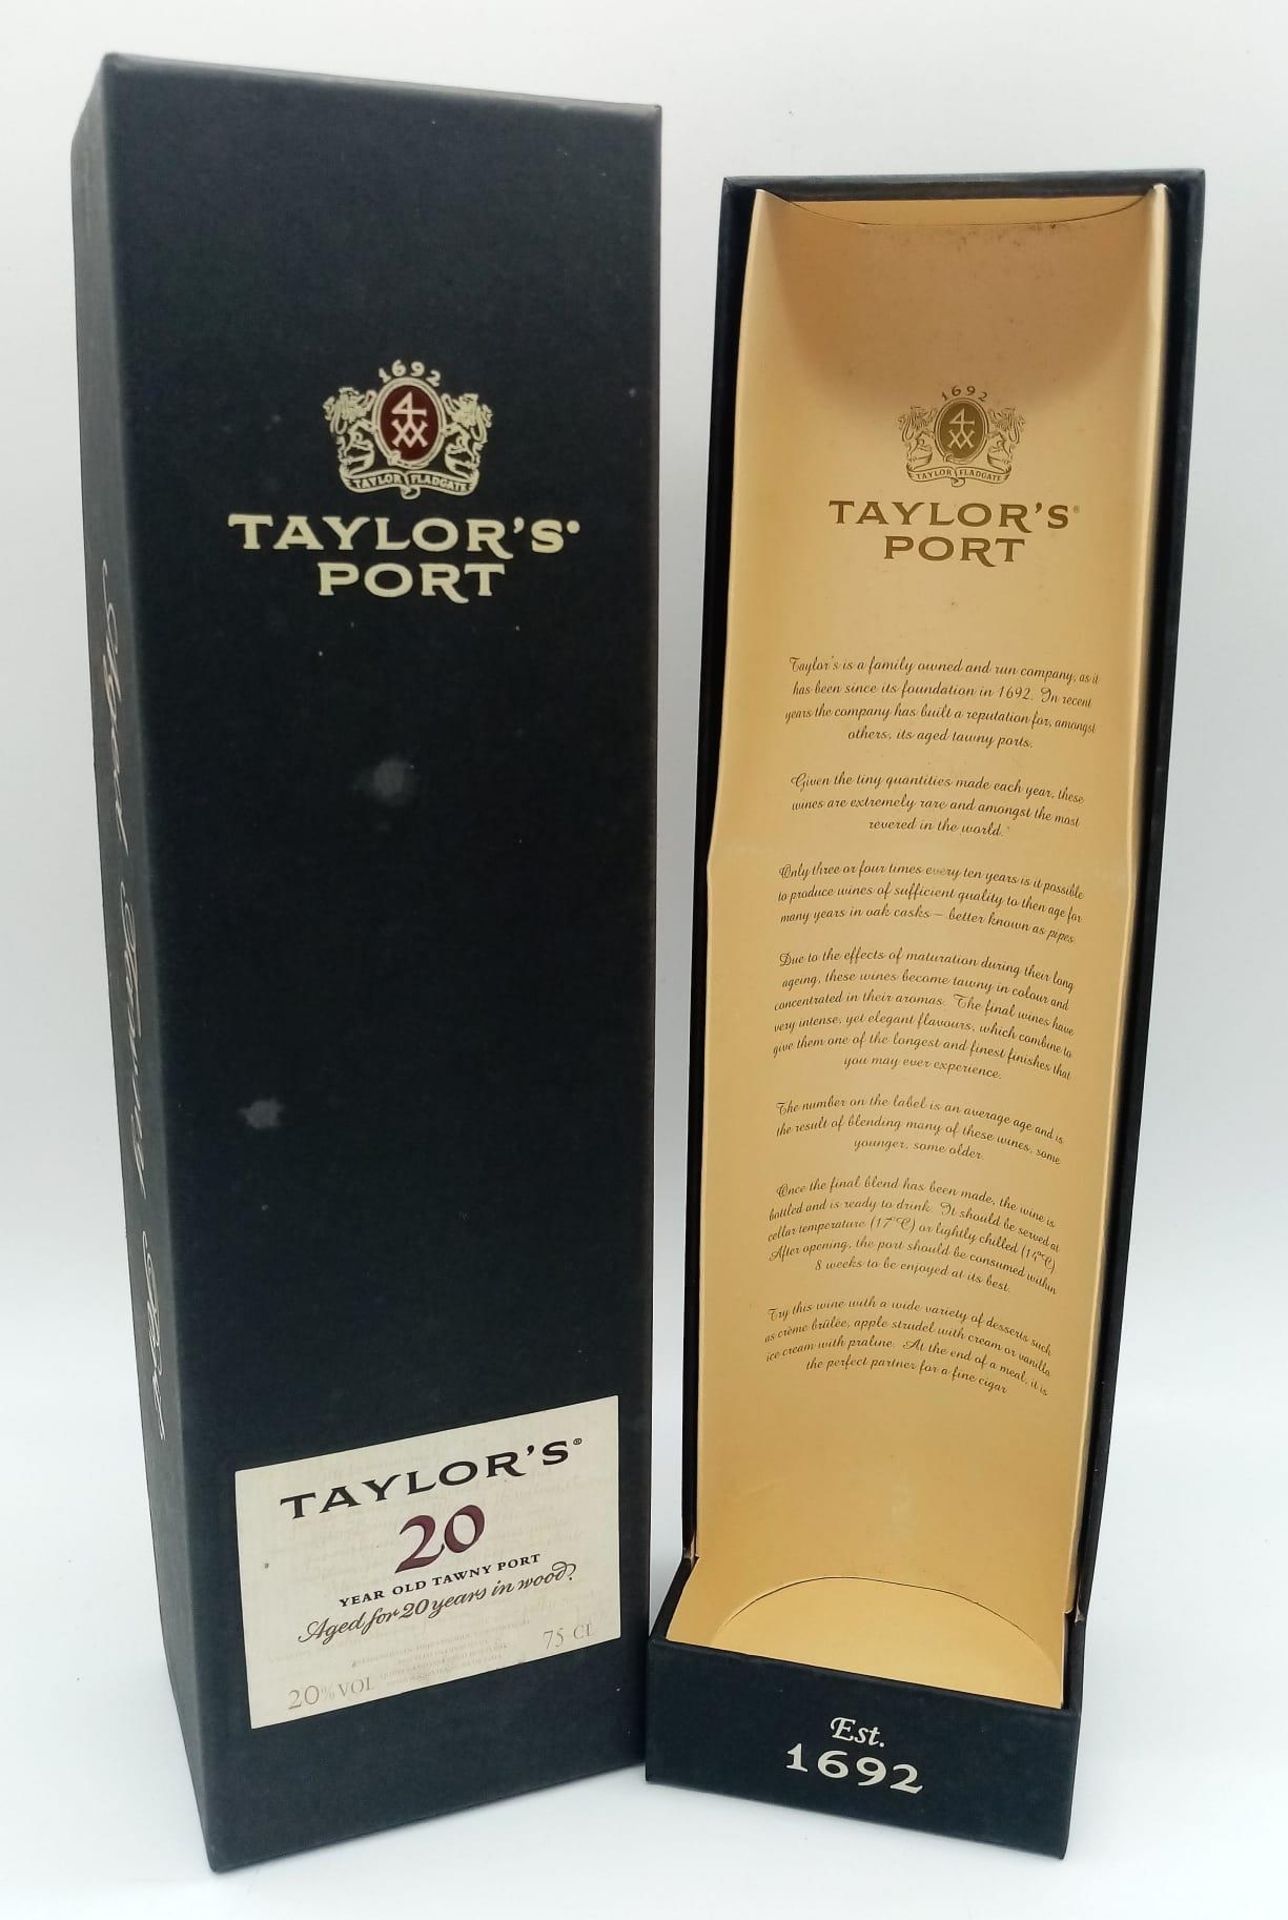 A Scarce Presentation Boxed Bottle of Taylors 20 Year Old Tawny Port. Full Contents, Unopened. - Image 5 of 5